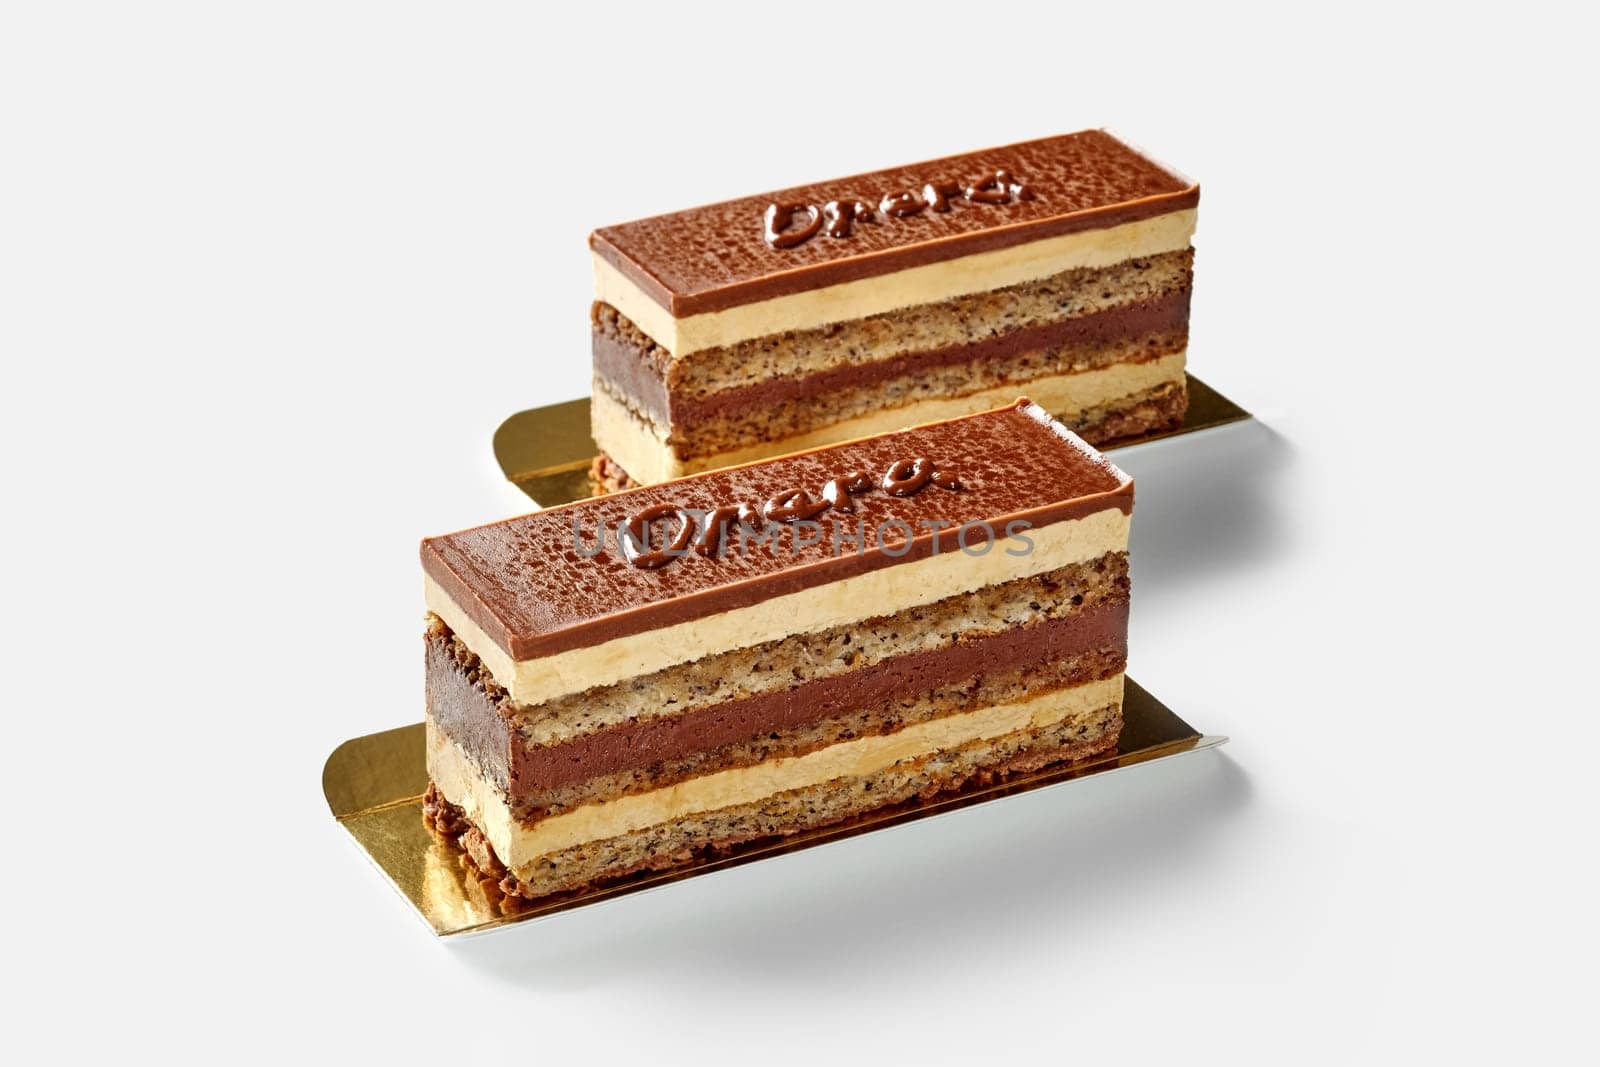 Cake slices with layers of walnut sponge pastry soaked in coffee syrup, chocolate ganache and buttercream, with word Opera written on chocolate glaze, isolated on white. French style confectionery